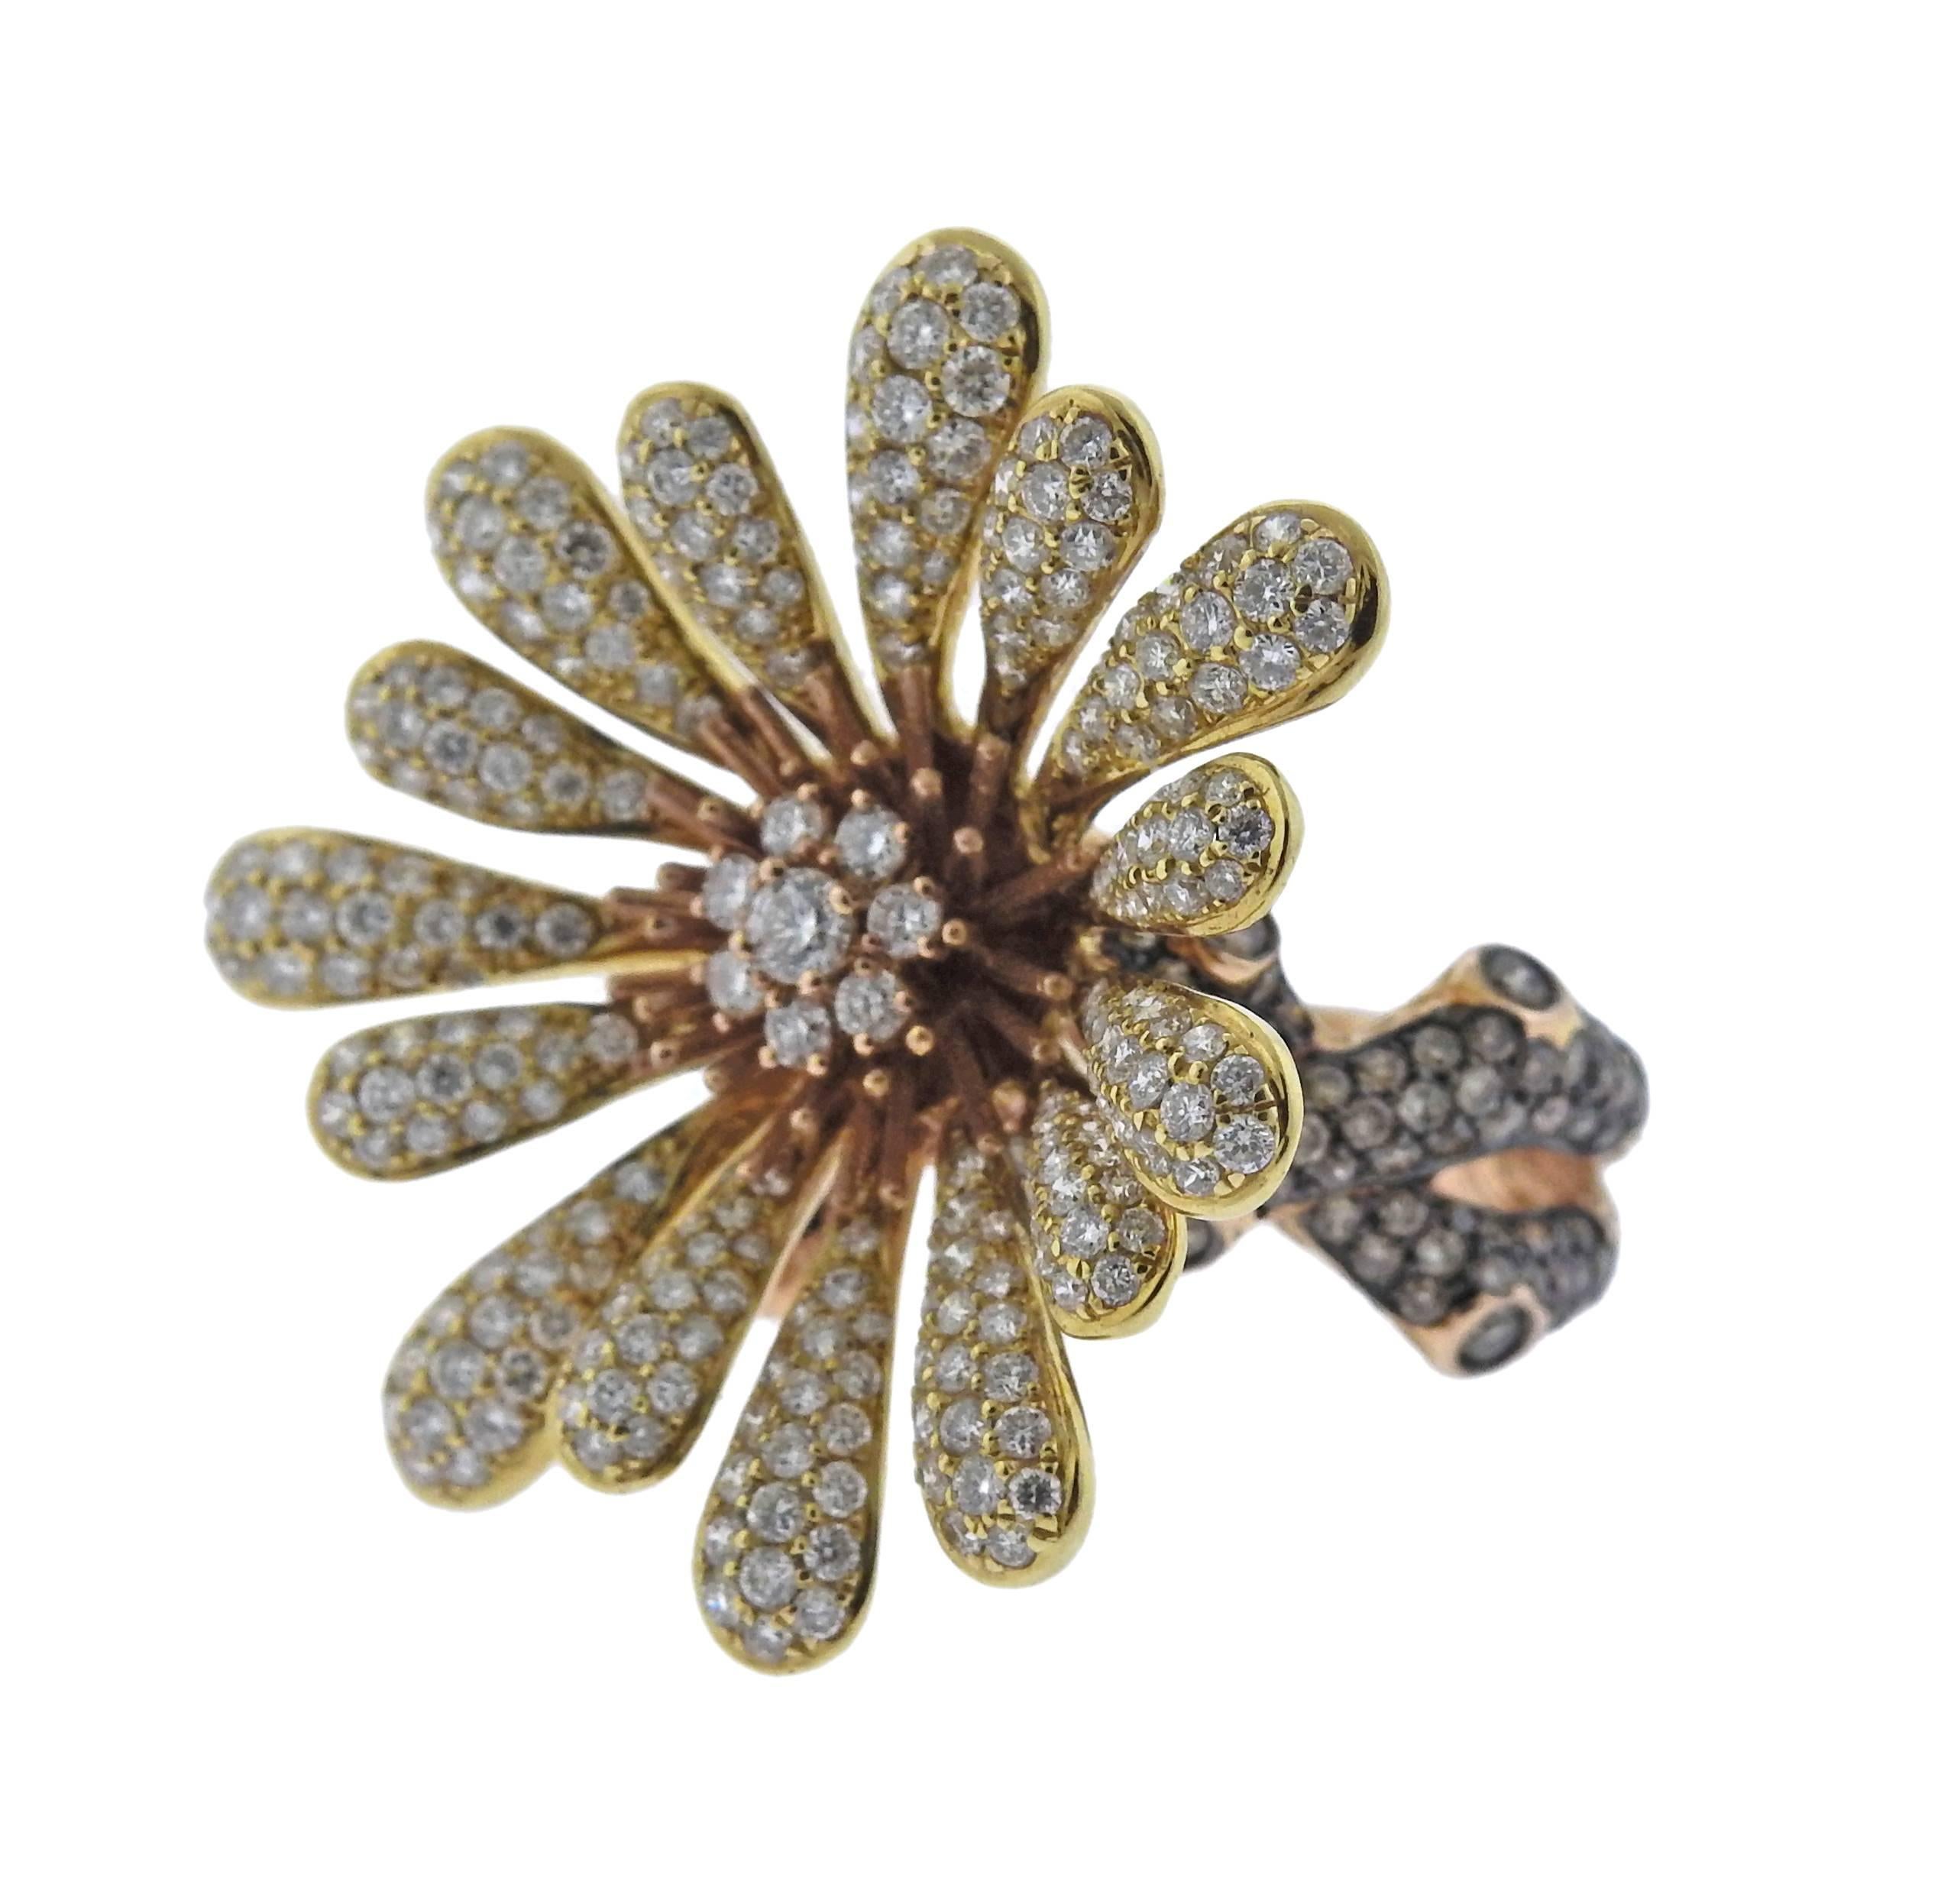 Large modern 18k gold flower ring, featuring a total of 2.87ctw in GH/VS diamonds. Ring size - 5.5, ring top - 30mm x 31mm, weighs 13.3 grams. Marked: 750 and D287.